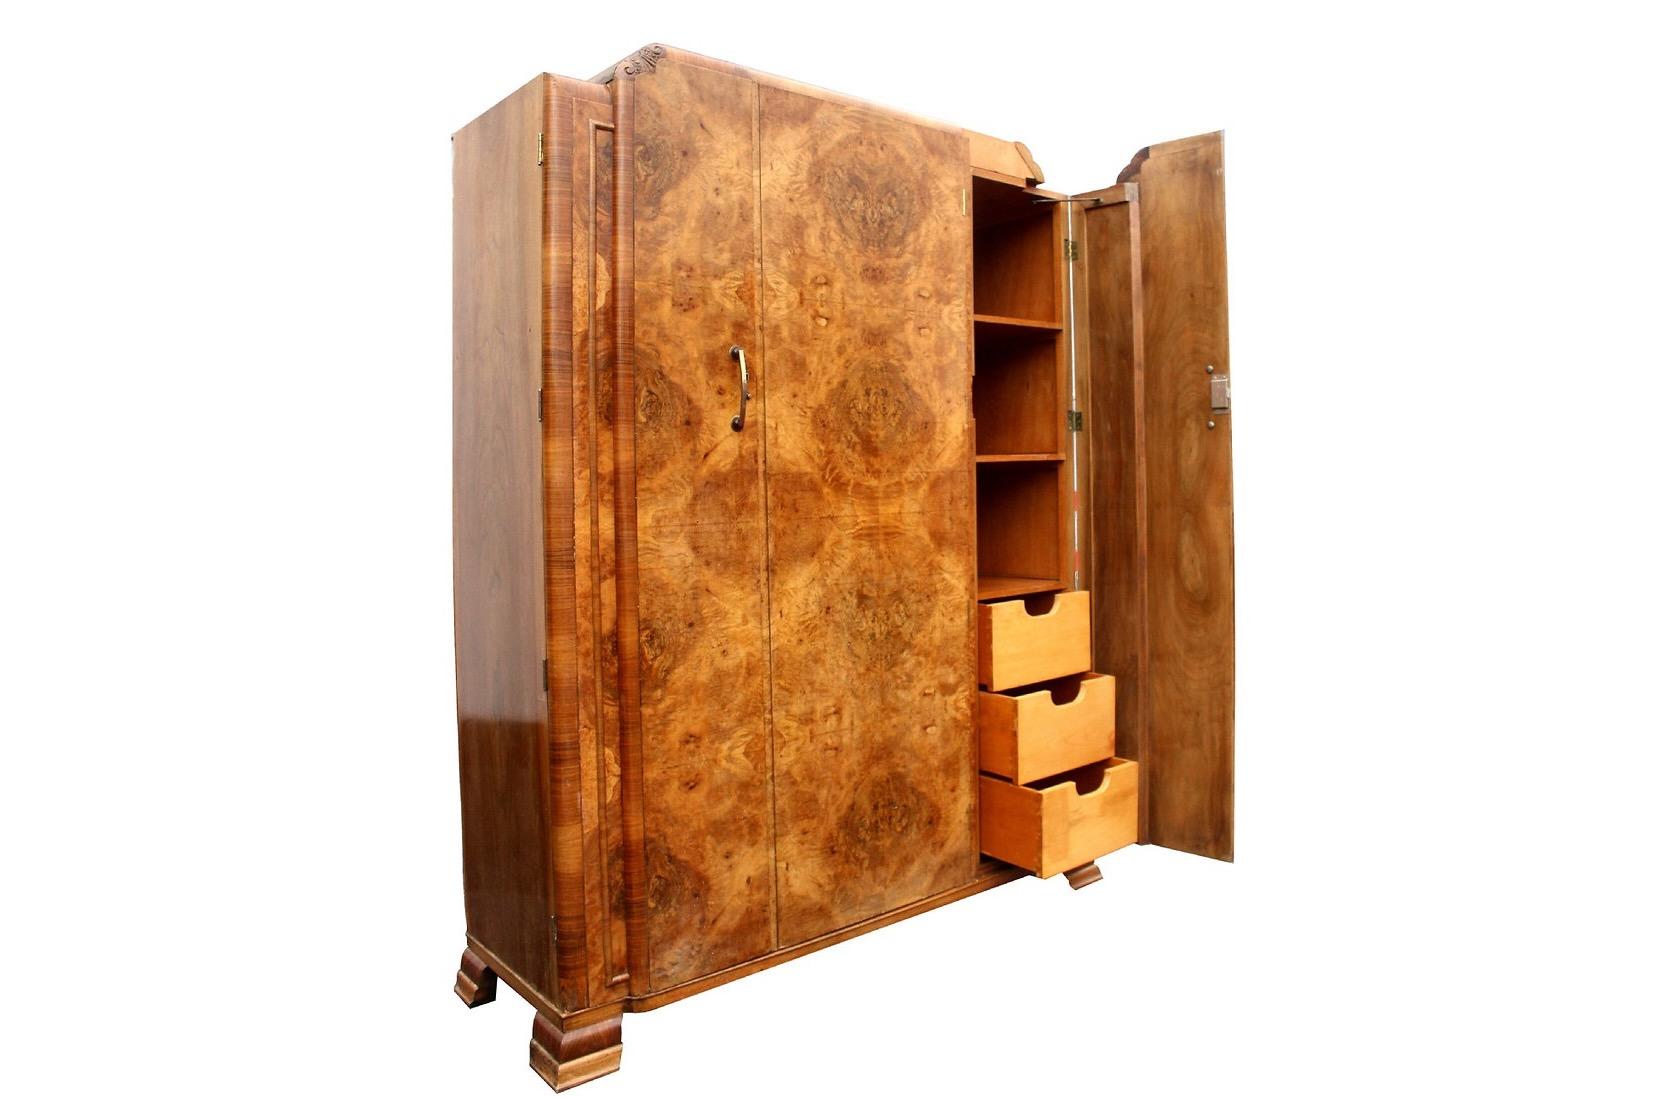 For your consideration is this extremely stylish English Art Deco heavily figured Walnut three-door wardrobe, dating to the 1930's with all original fixtures and fittings. Not only does this wardrobe look the part but it's extremely functional too